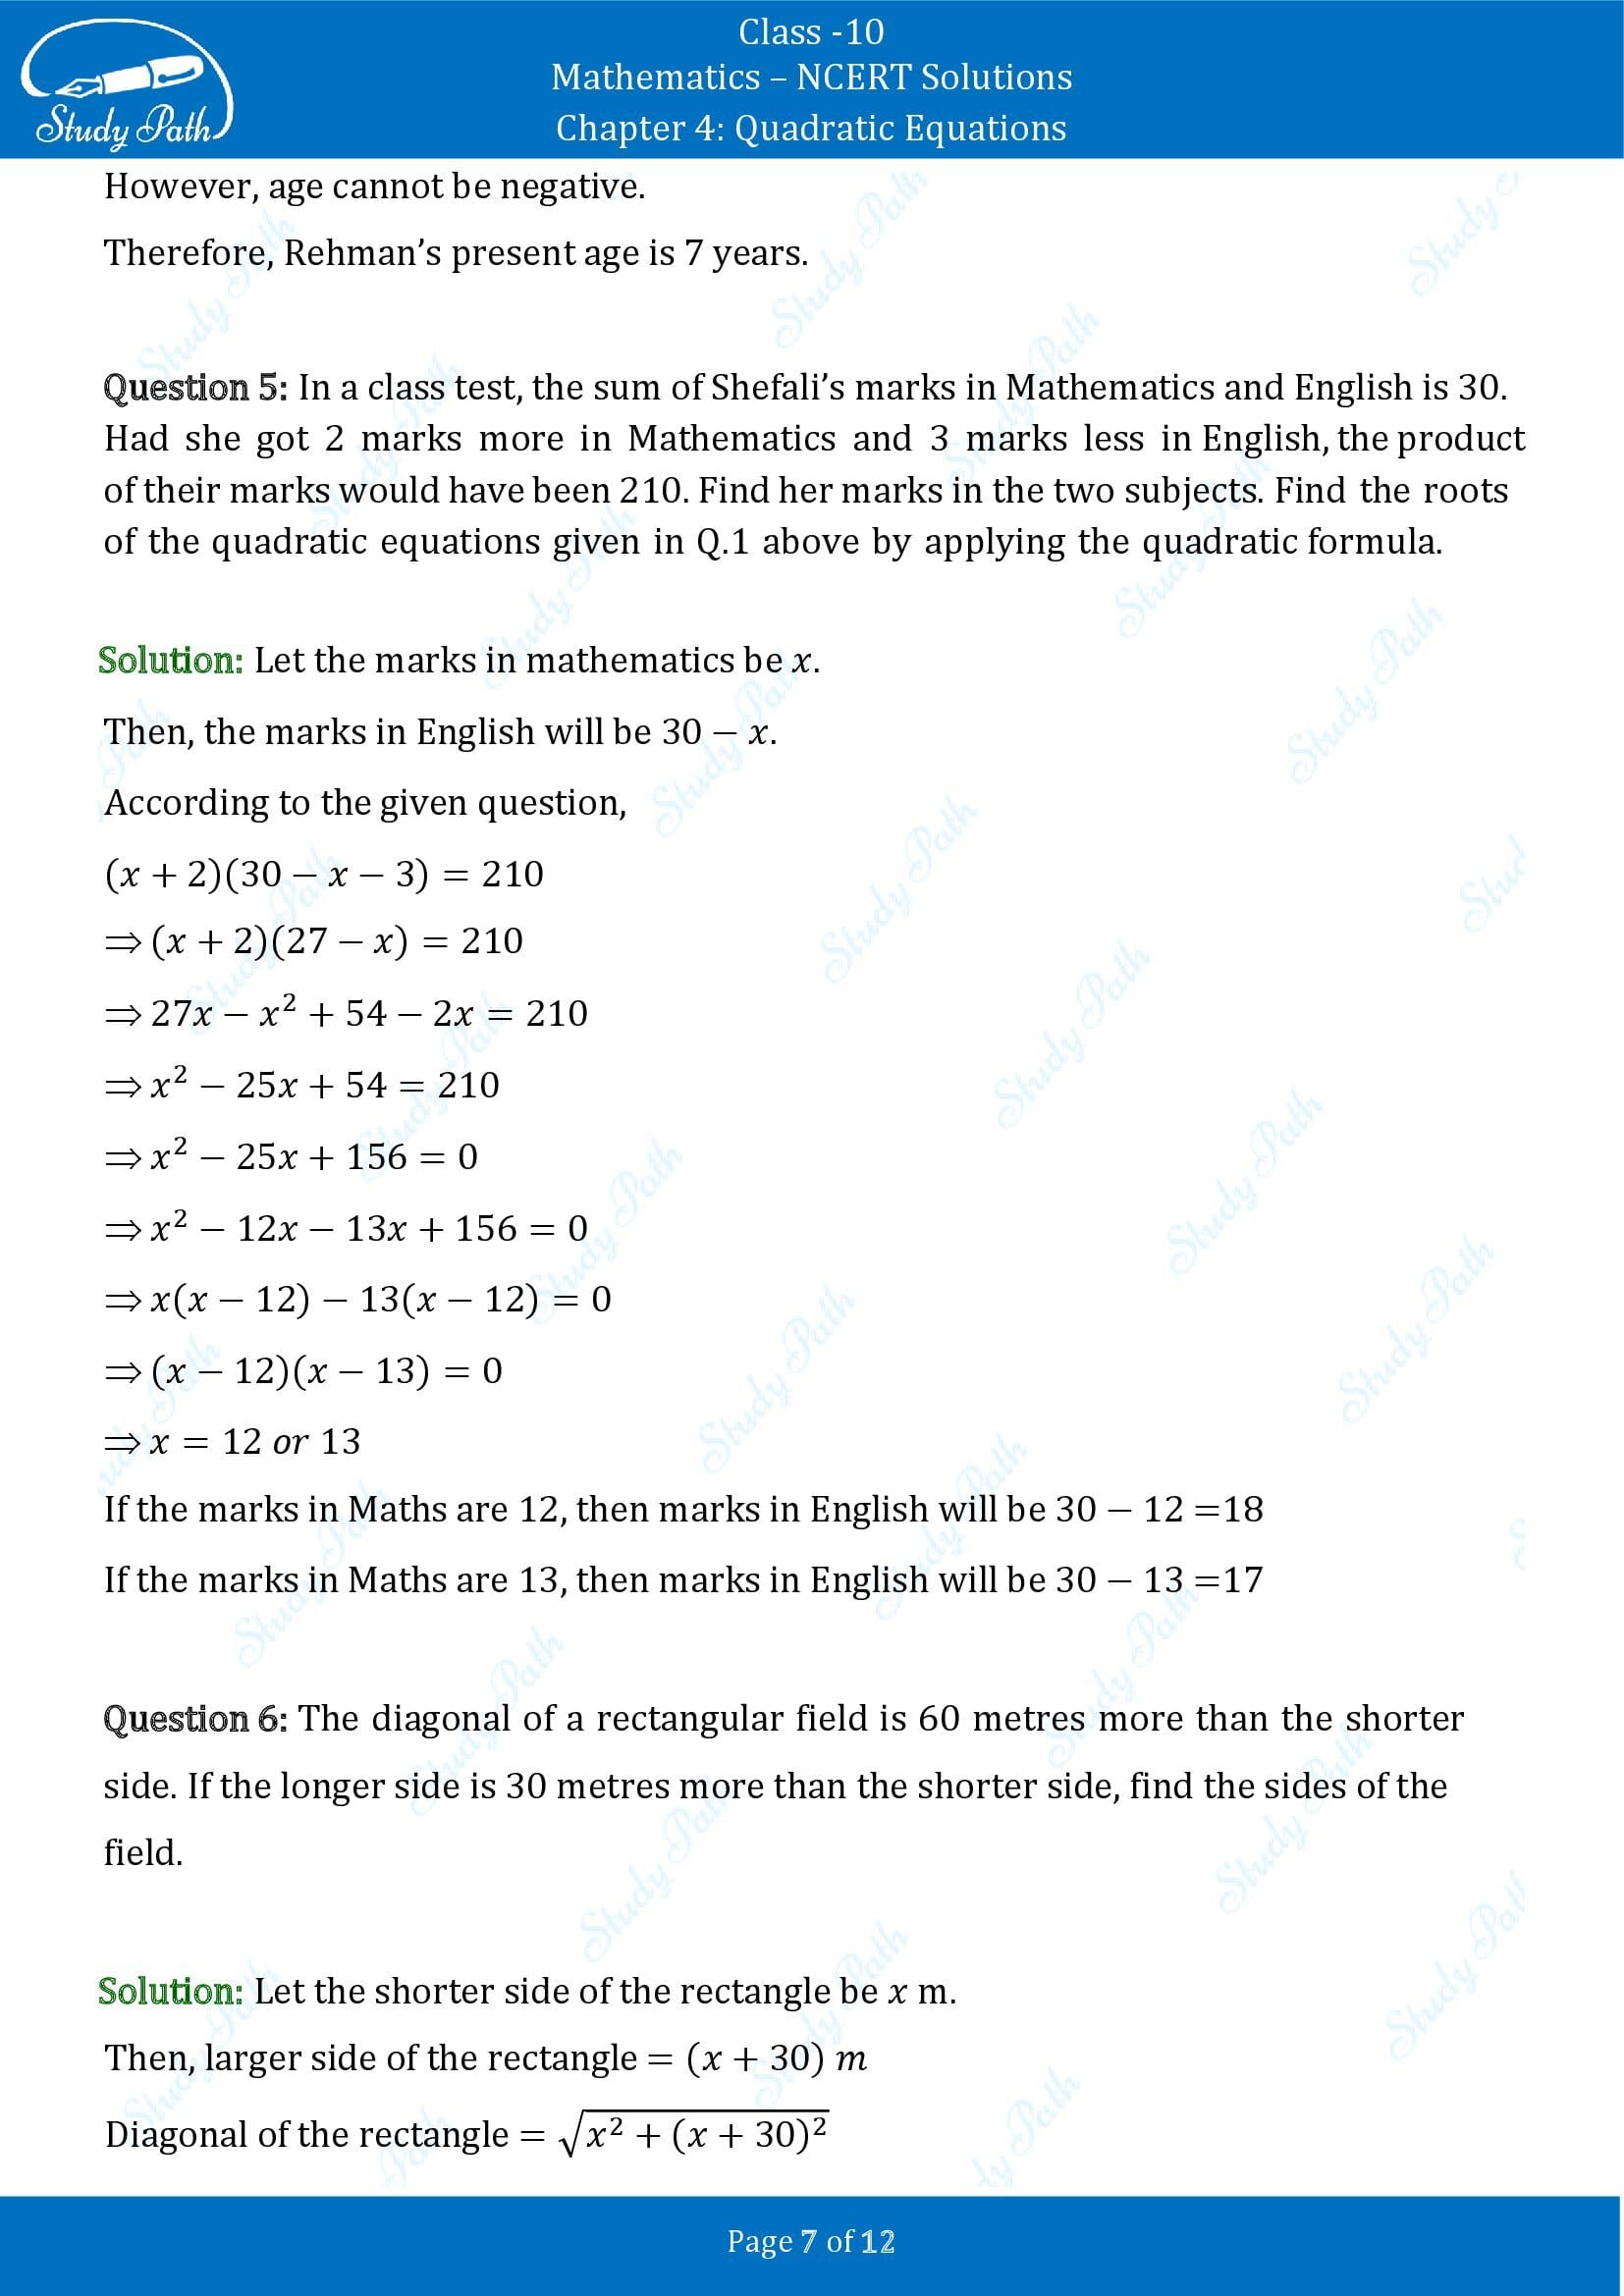 NCERT Solutions for Class 10 Maths Chapter 4 Quadratic Equations Exercise 4.3 0007